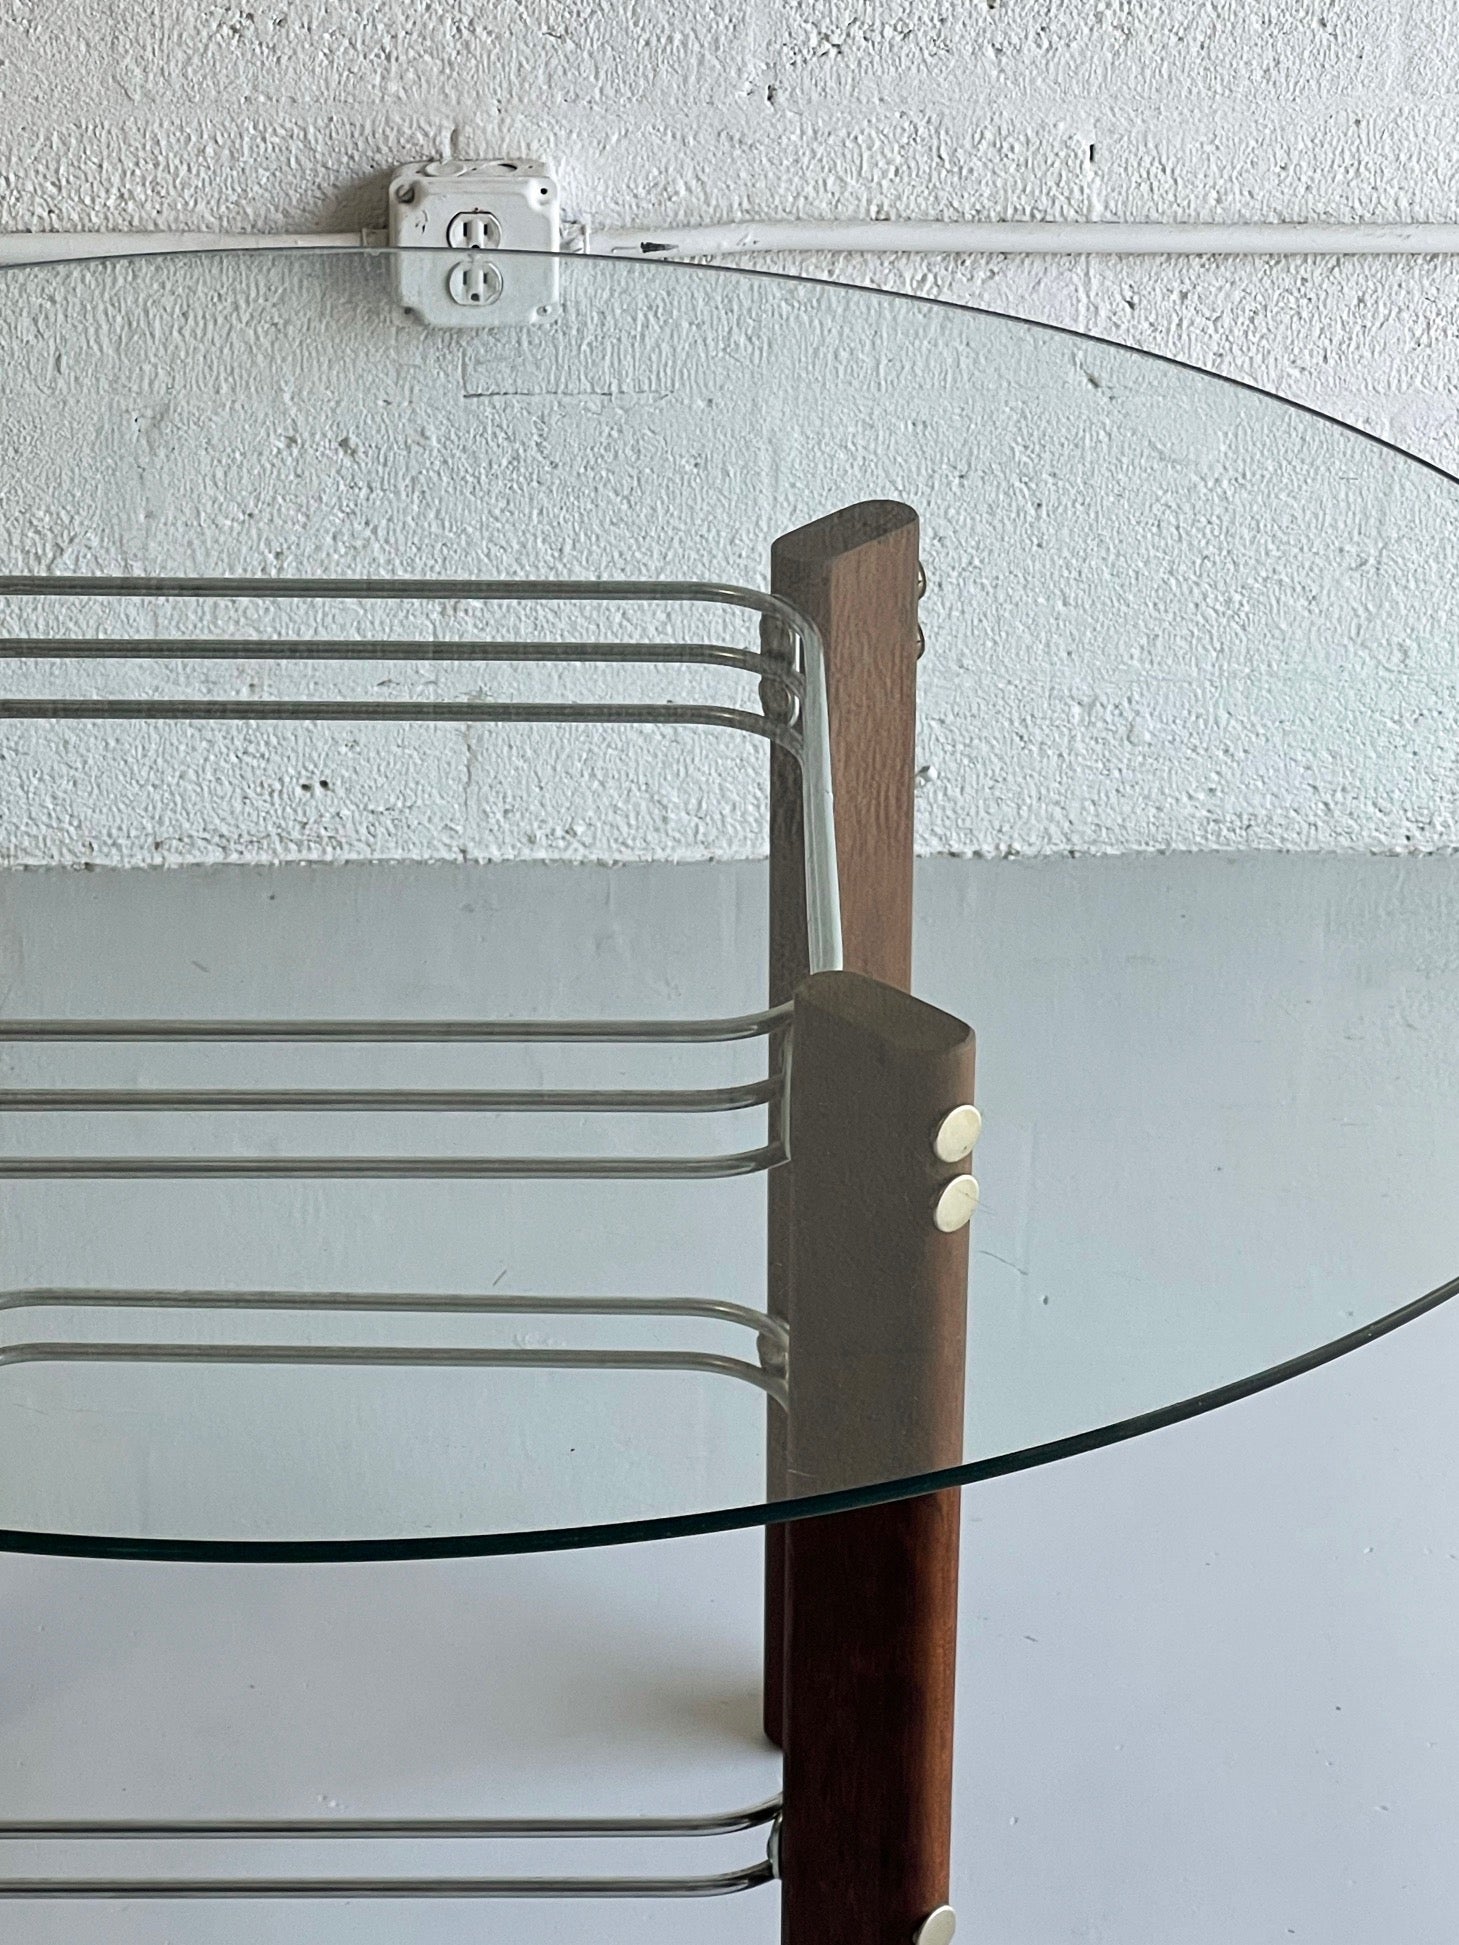 ‘Ascona’ Dining Table by Heinz Meier for Landes, 1960s